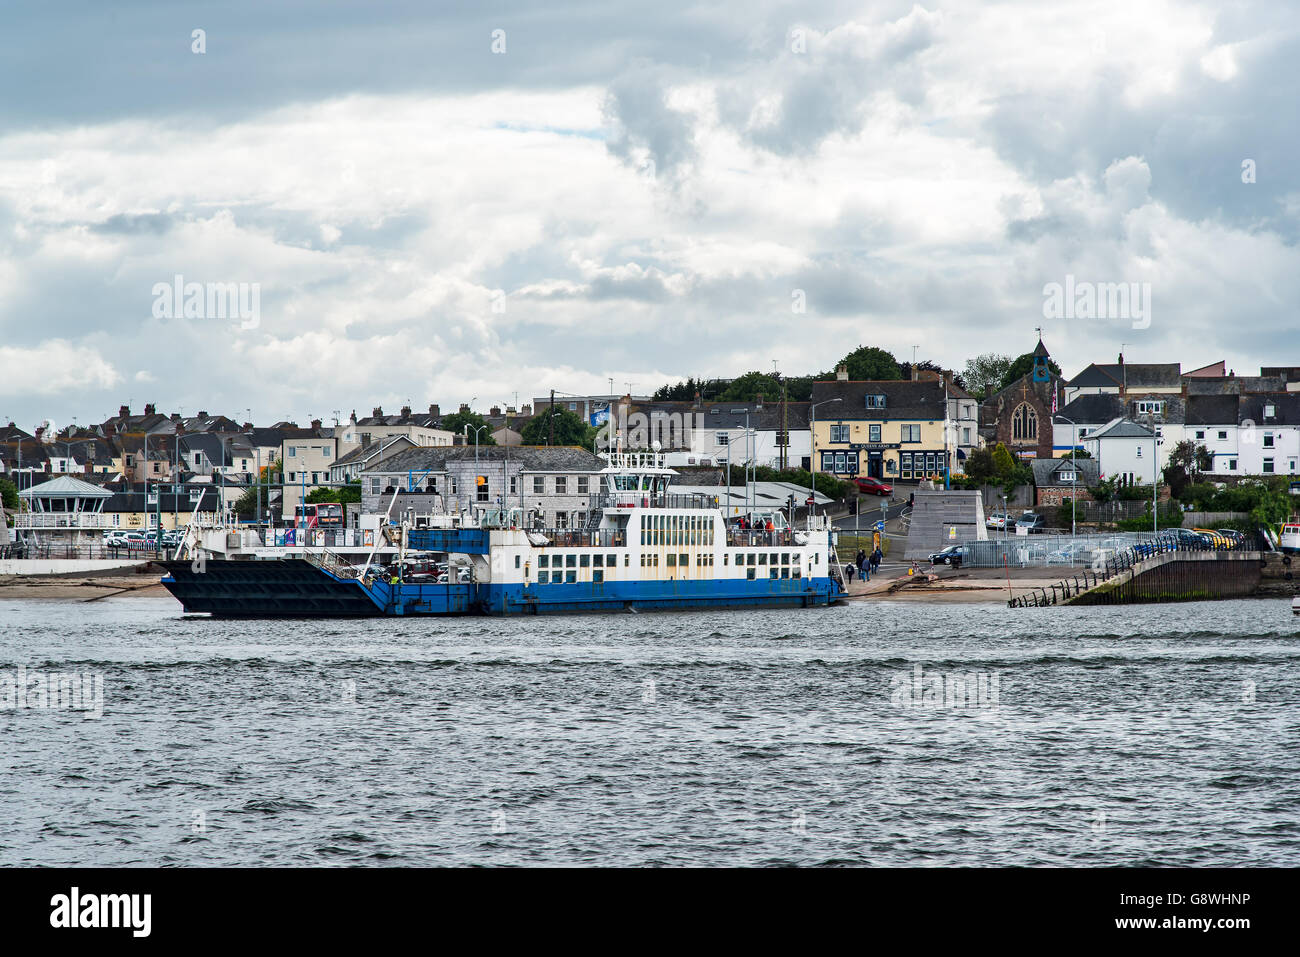 The Torpoint Chain ferry at its Torpoint, Cornwall Station. Stock Photo